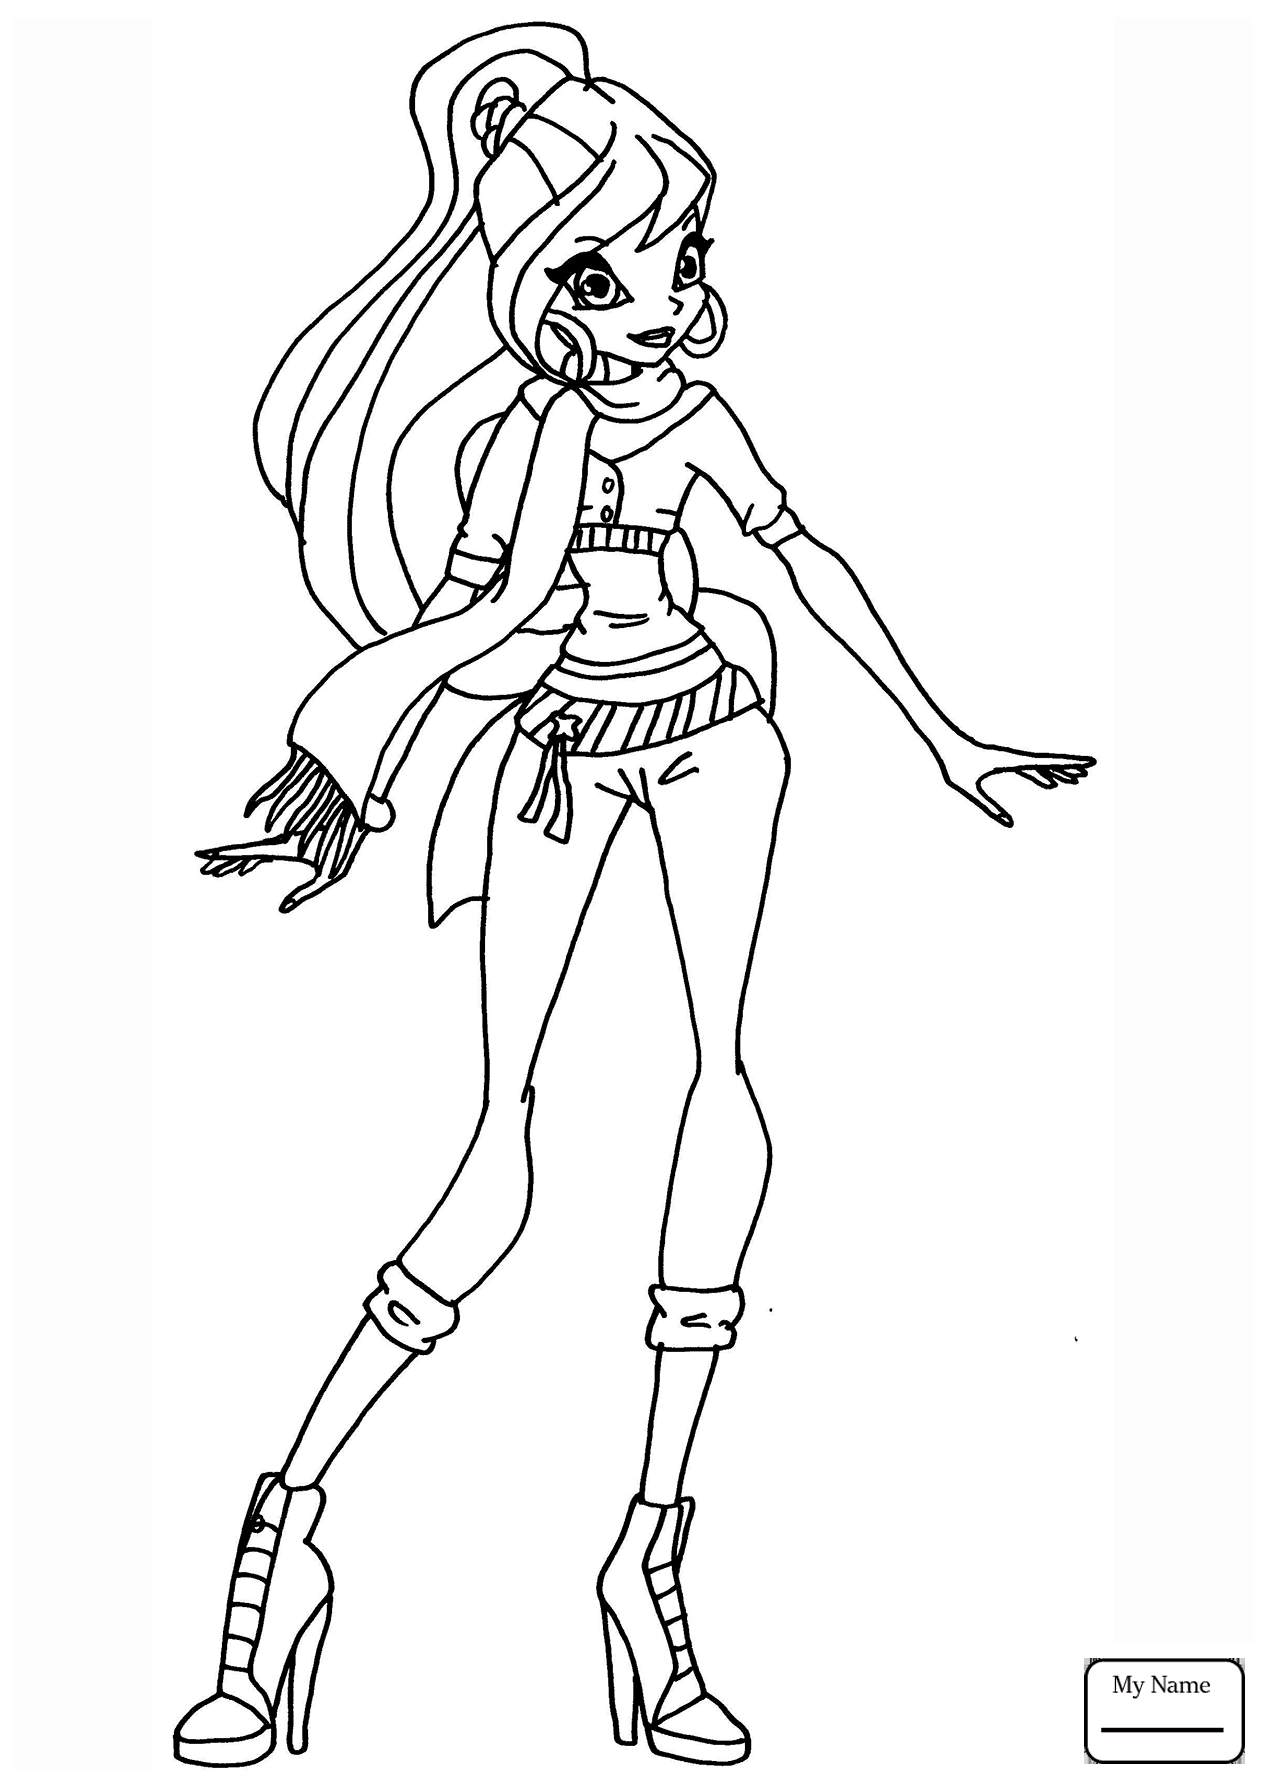 Best How To Draw Winx Club Characters of all time The ultimate guide 